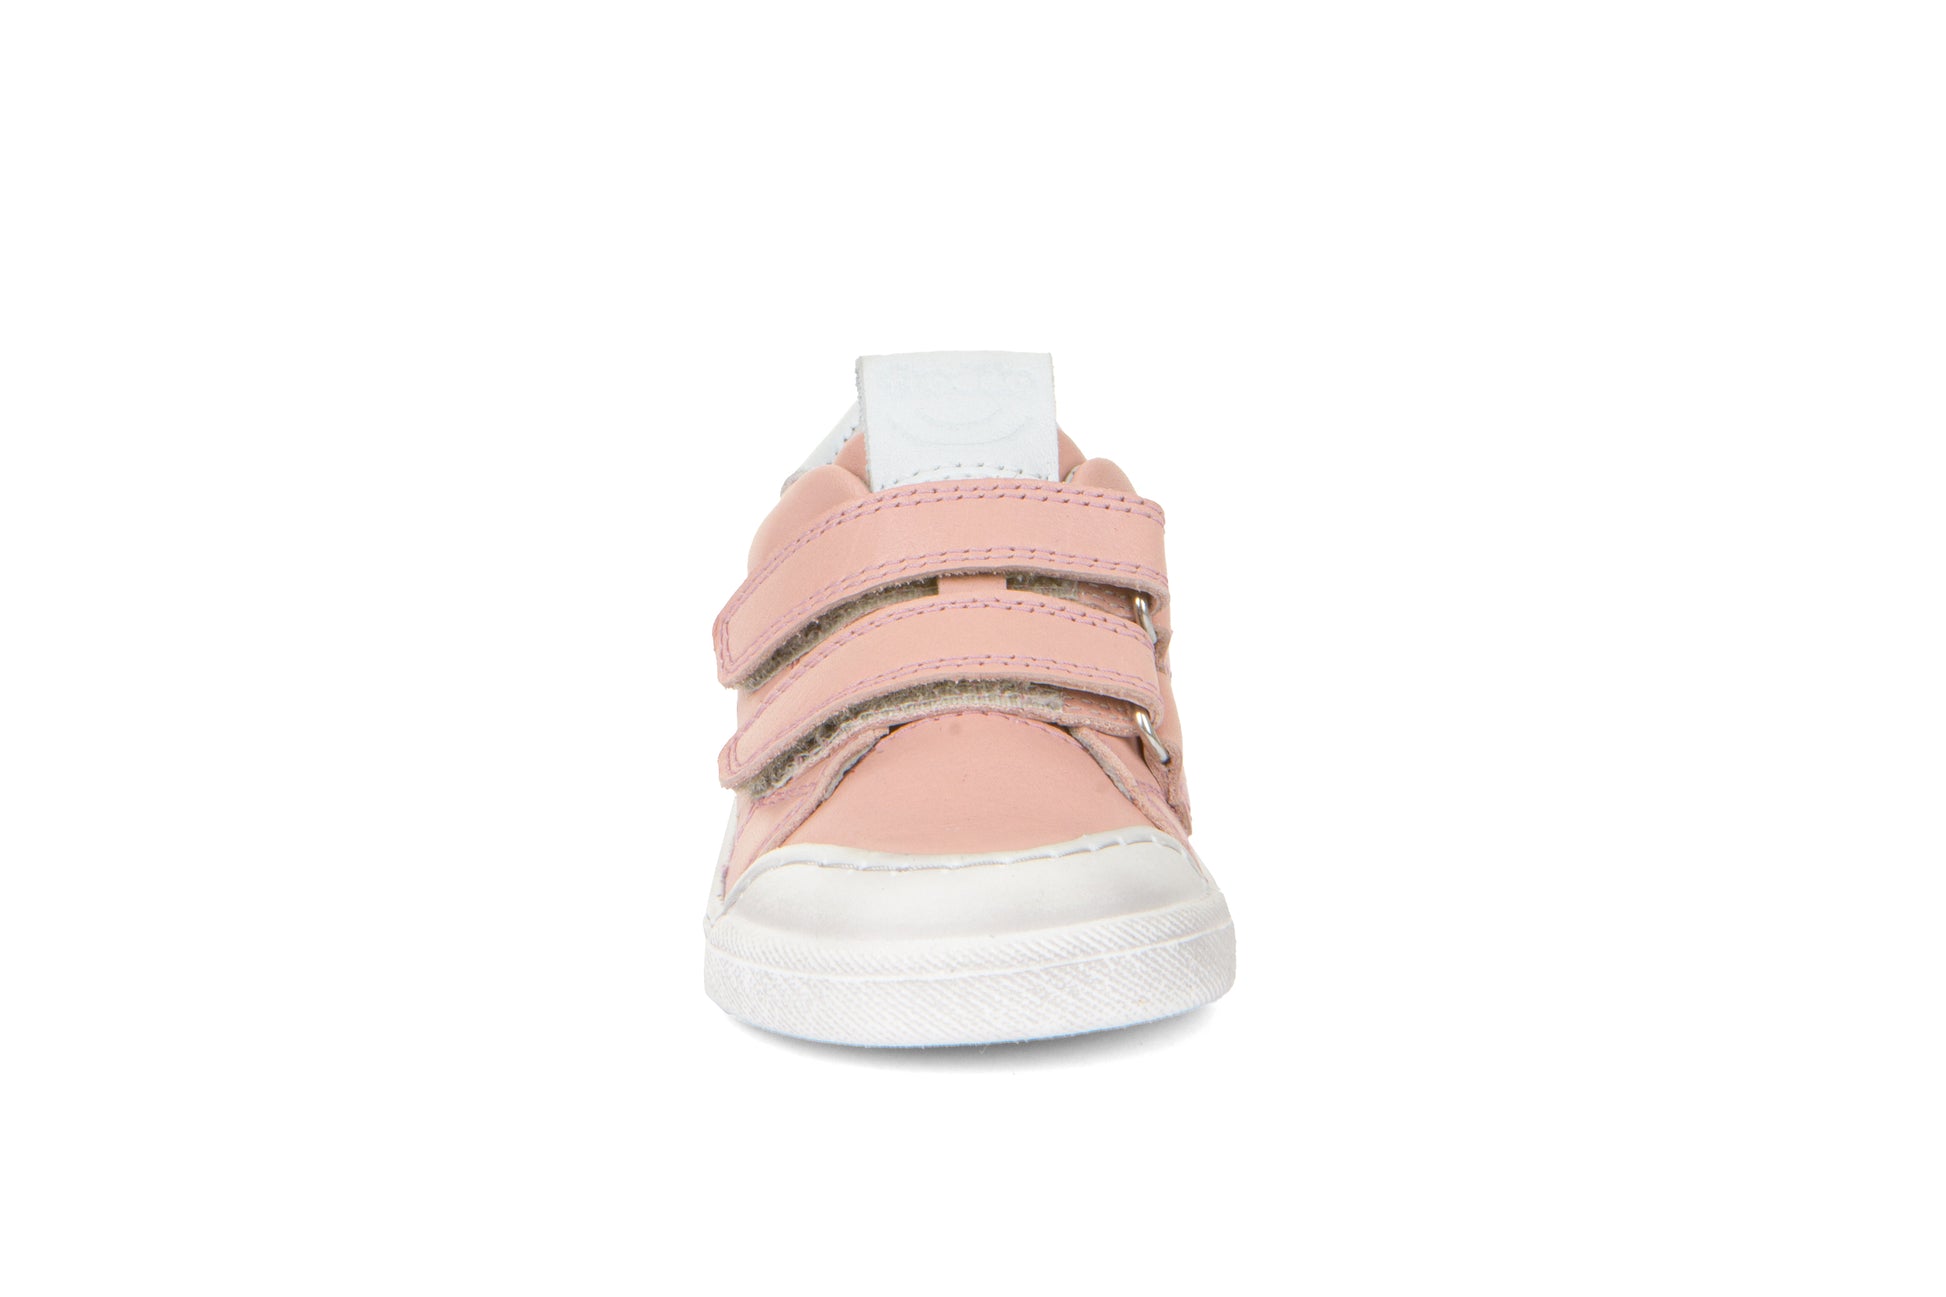 A girls casual shoe by Froddo, style G2130290-4 Rosario, in pink with white trim, velcro fastening. Front view.